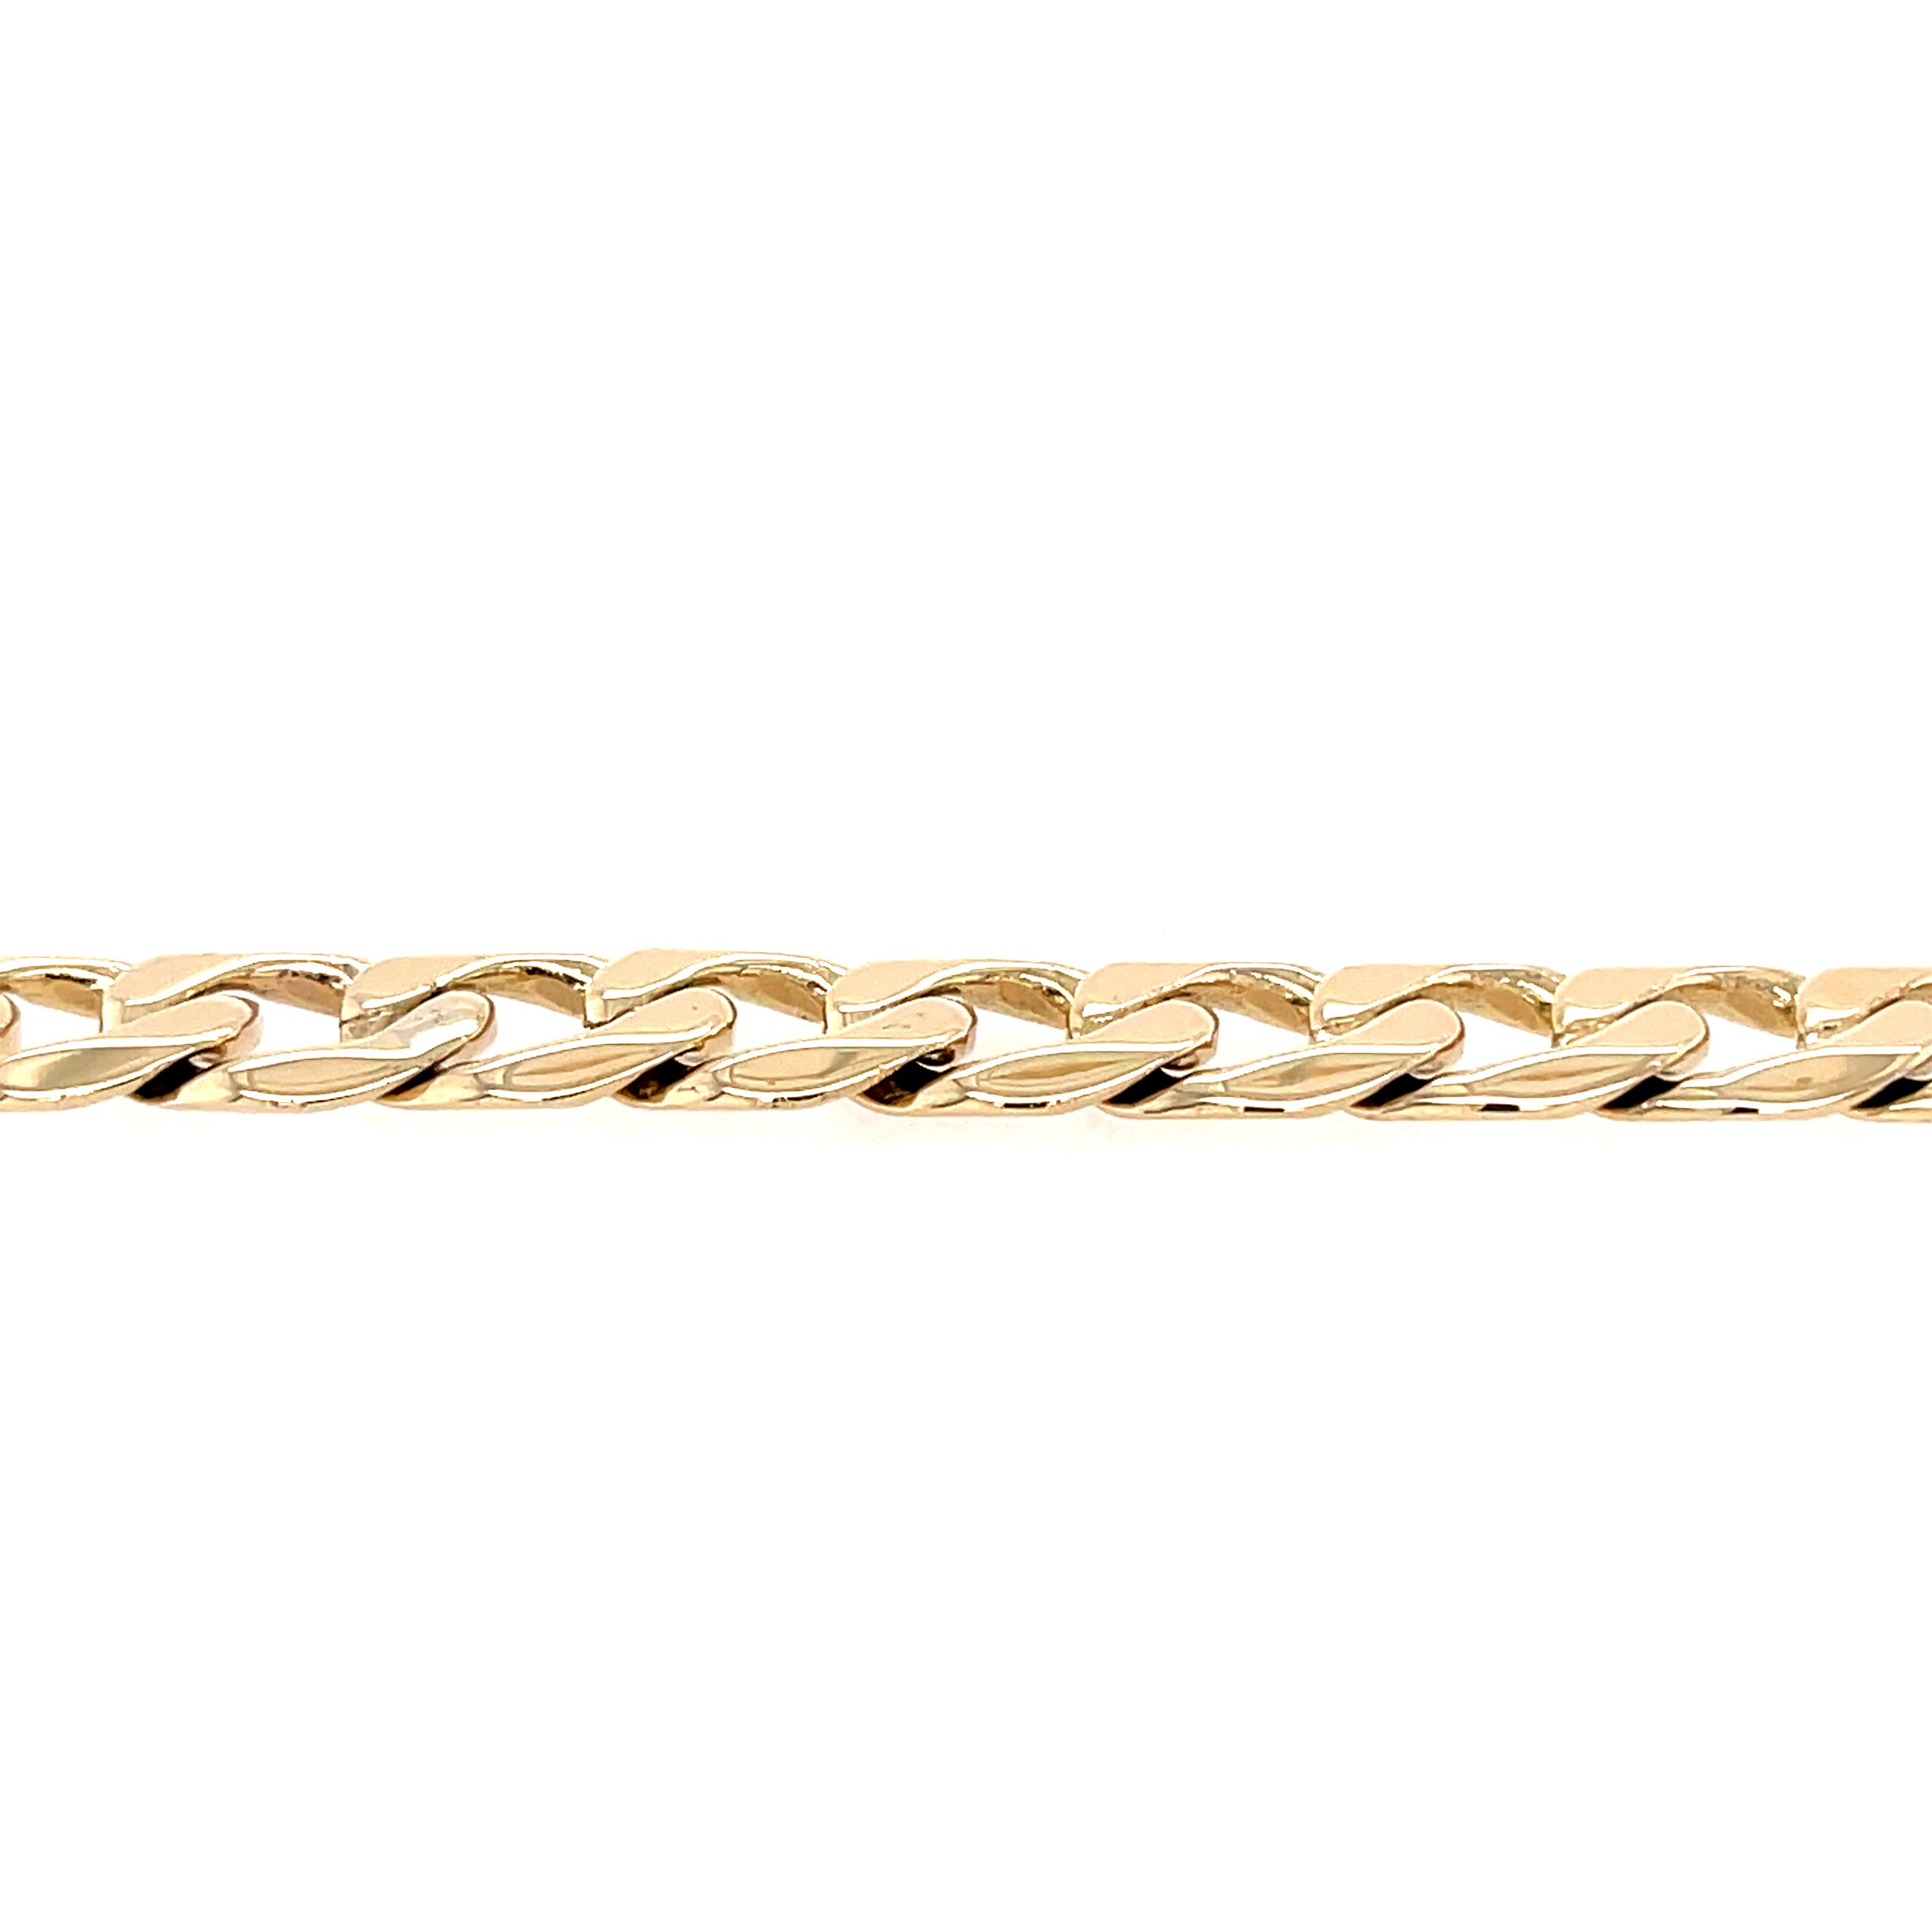 9ct Yellow Gold 8.5" Curb Link Bracelet 20.35g